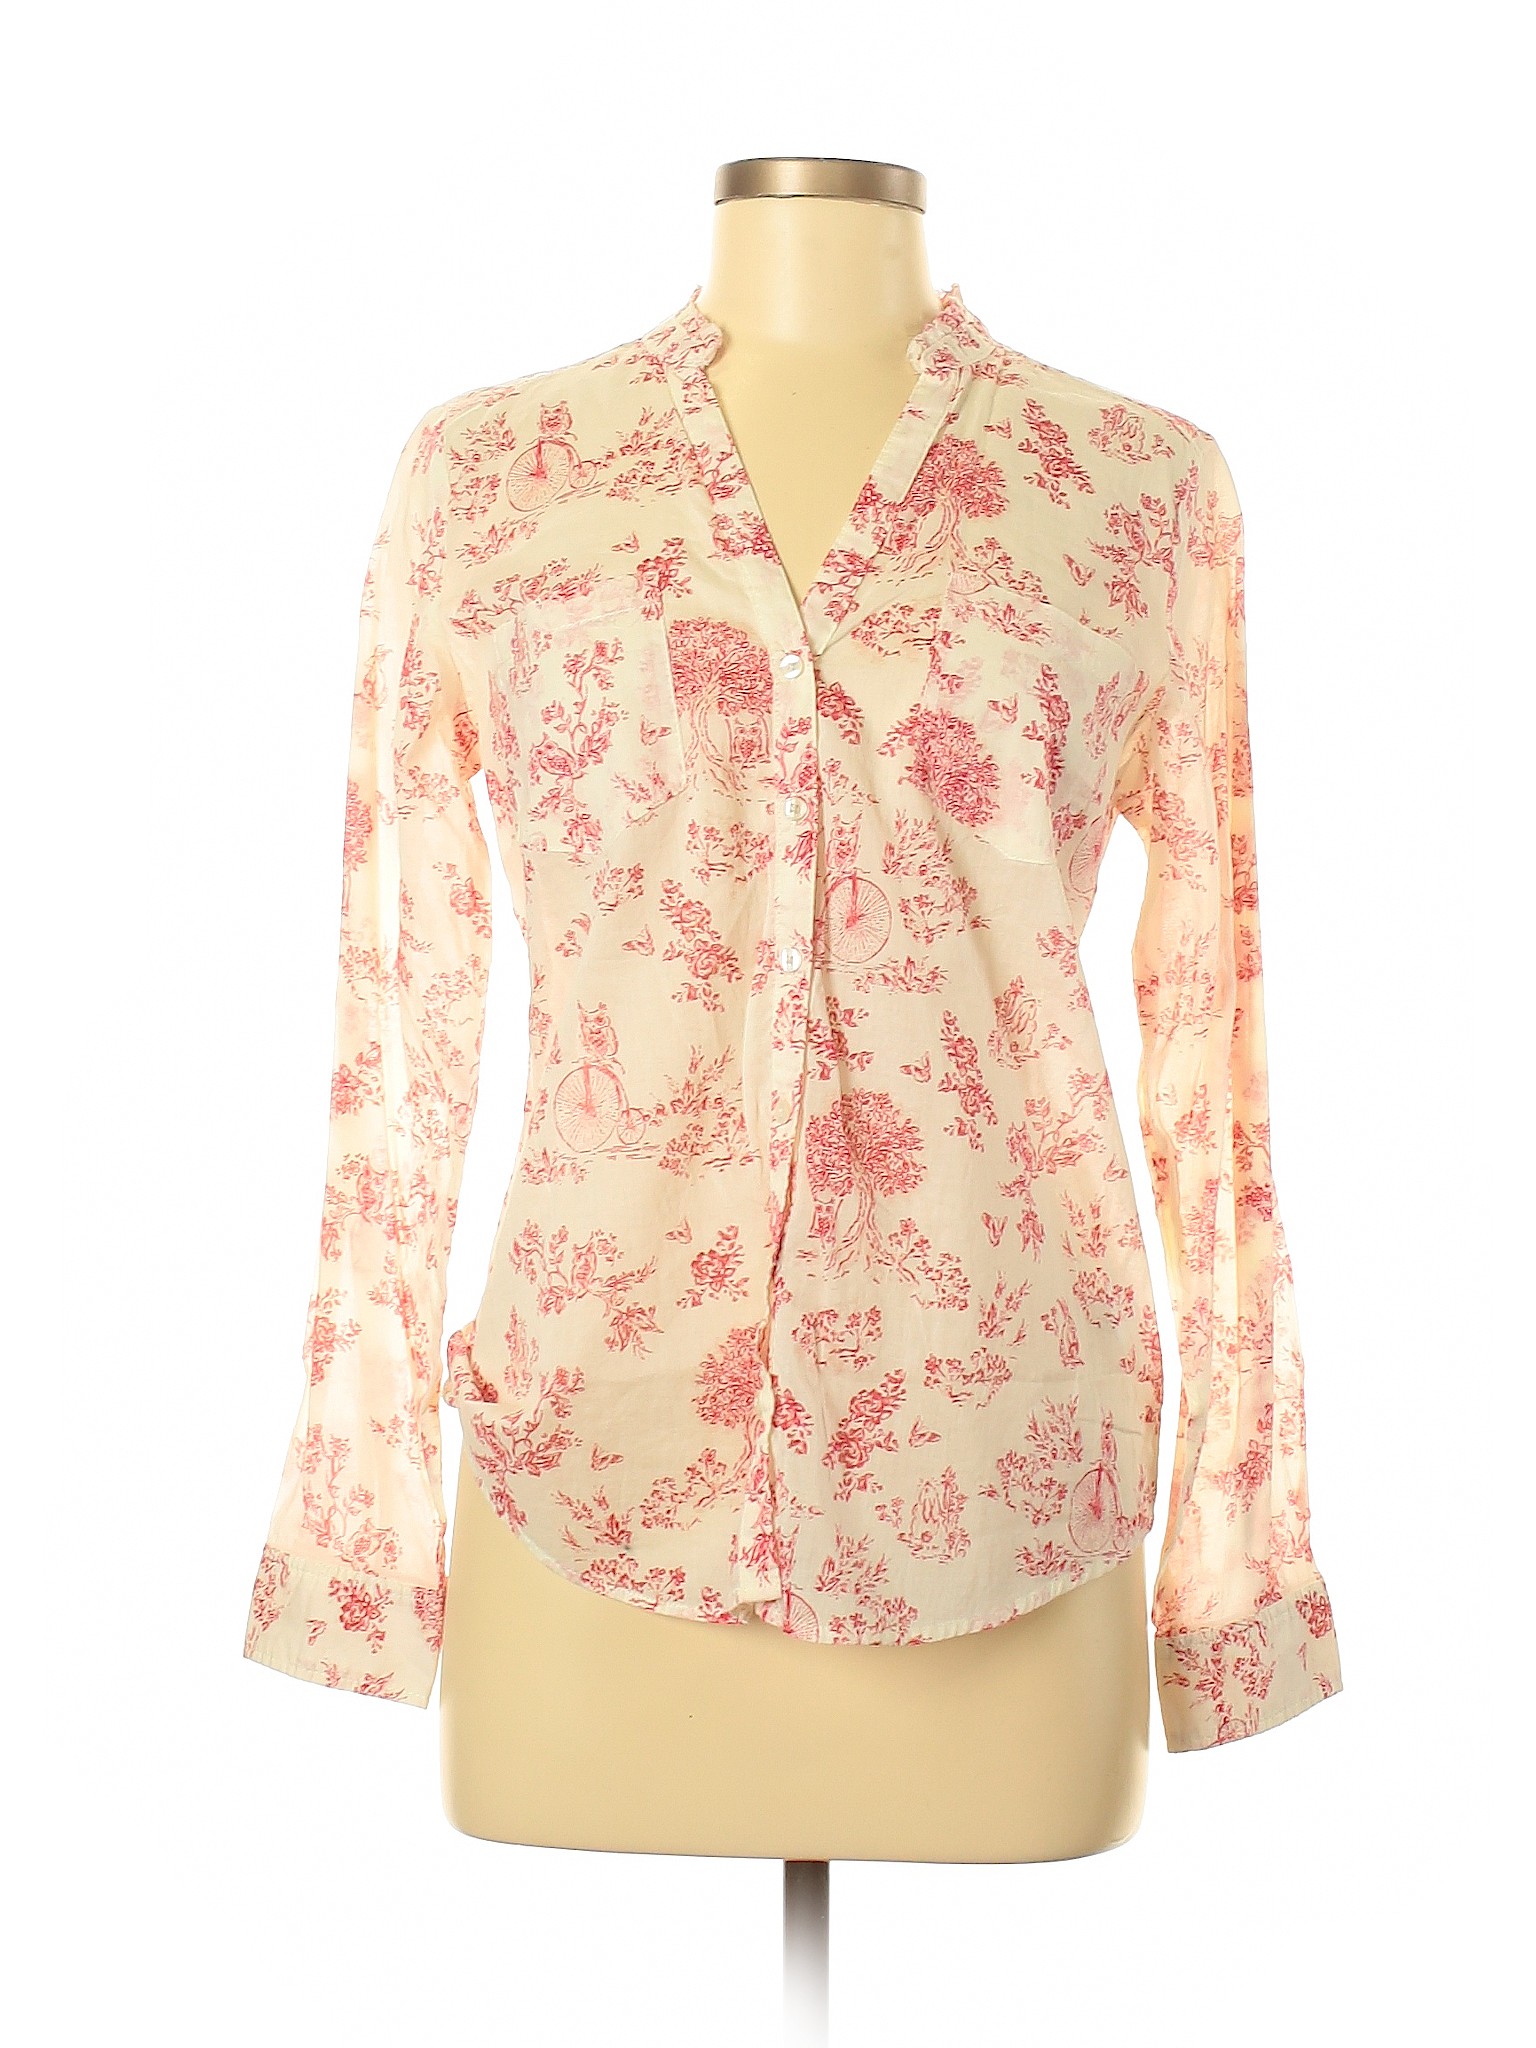 LC Lauren Conrad 100% Cotton Floral Pink Ivory Long Sleeve Button-Down ...